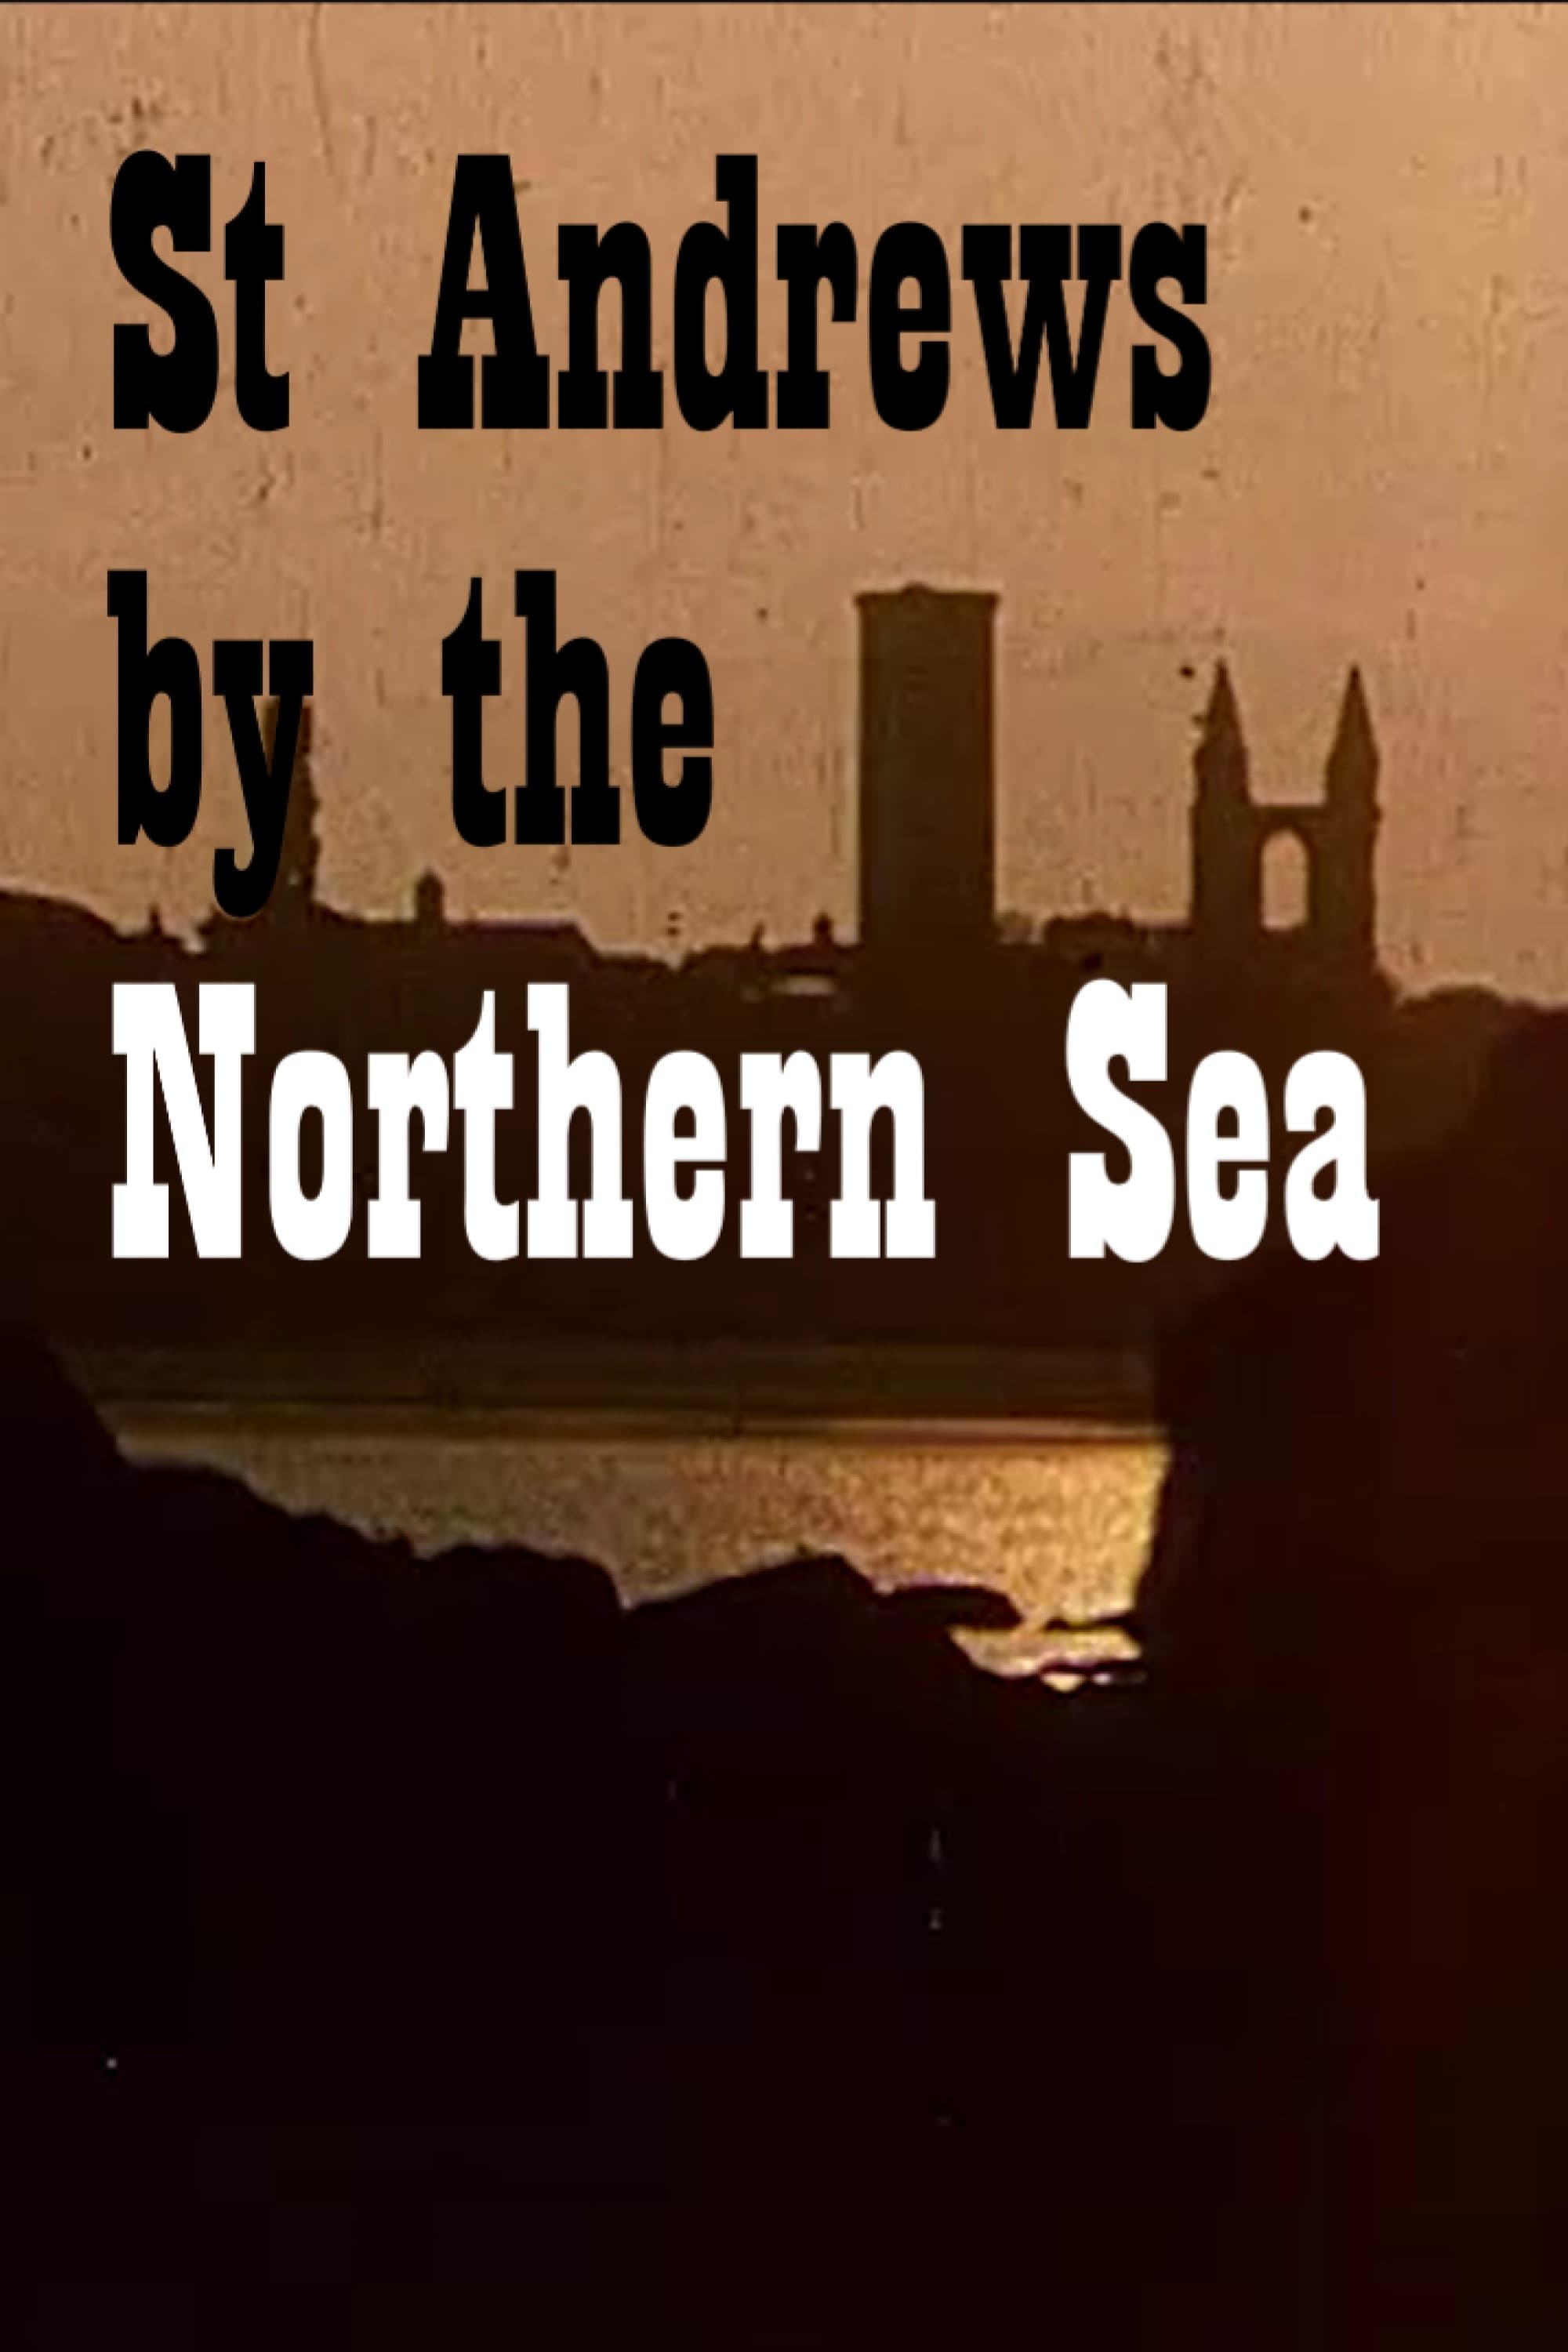 ST. ANDREWS BY THE NORTHERN SEA